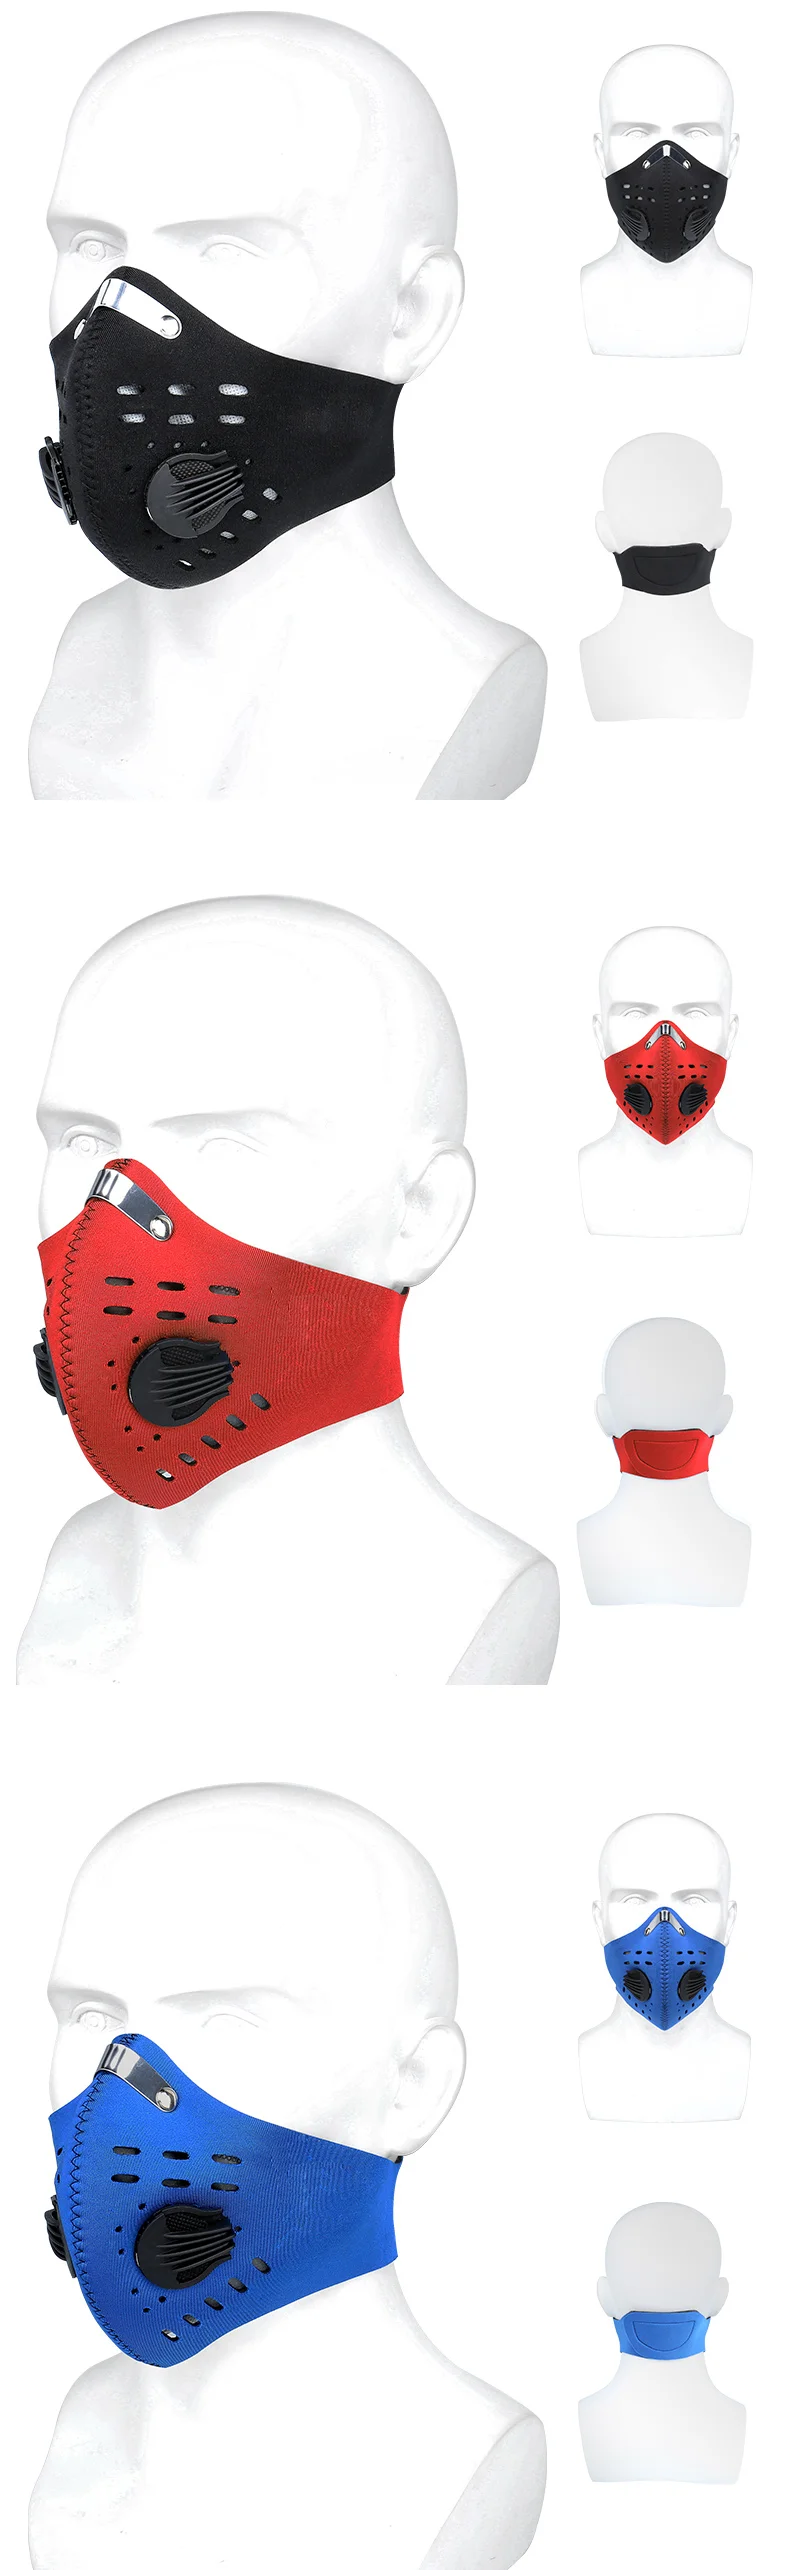 X-TIGER KN95 Antiviral Coronavirus Protection mask Cycling Face Mask Anti-Pollution breathing Mask With Activated Carbon Filters